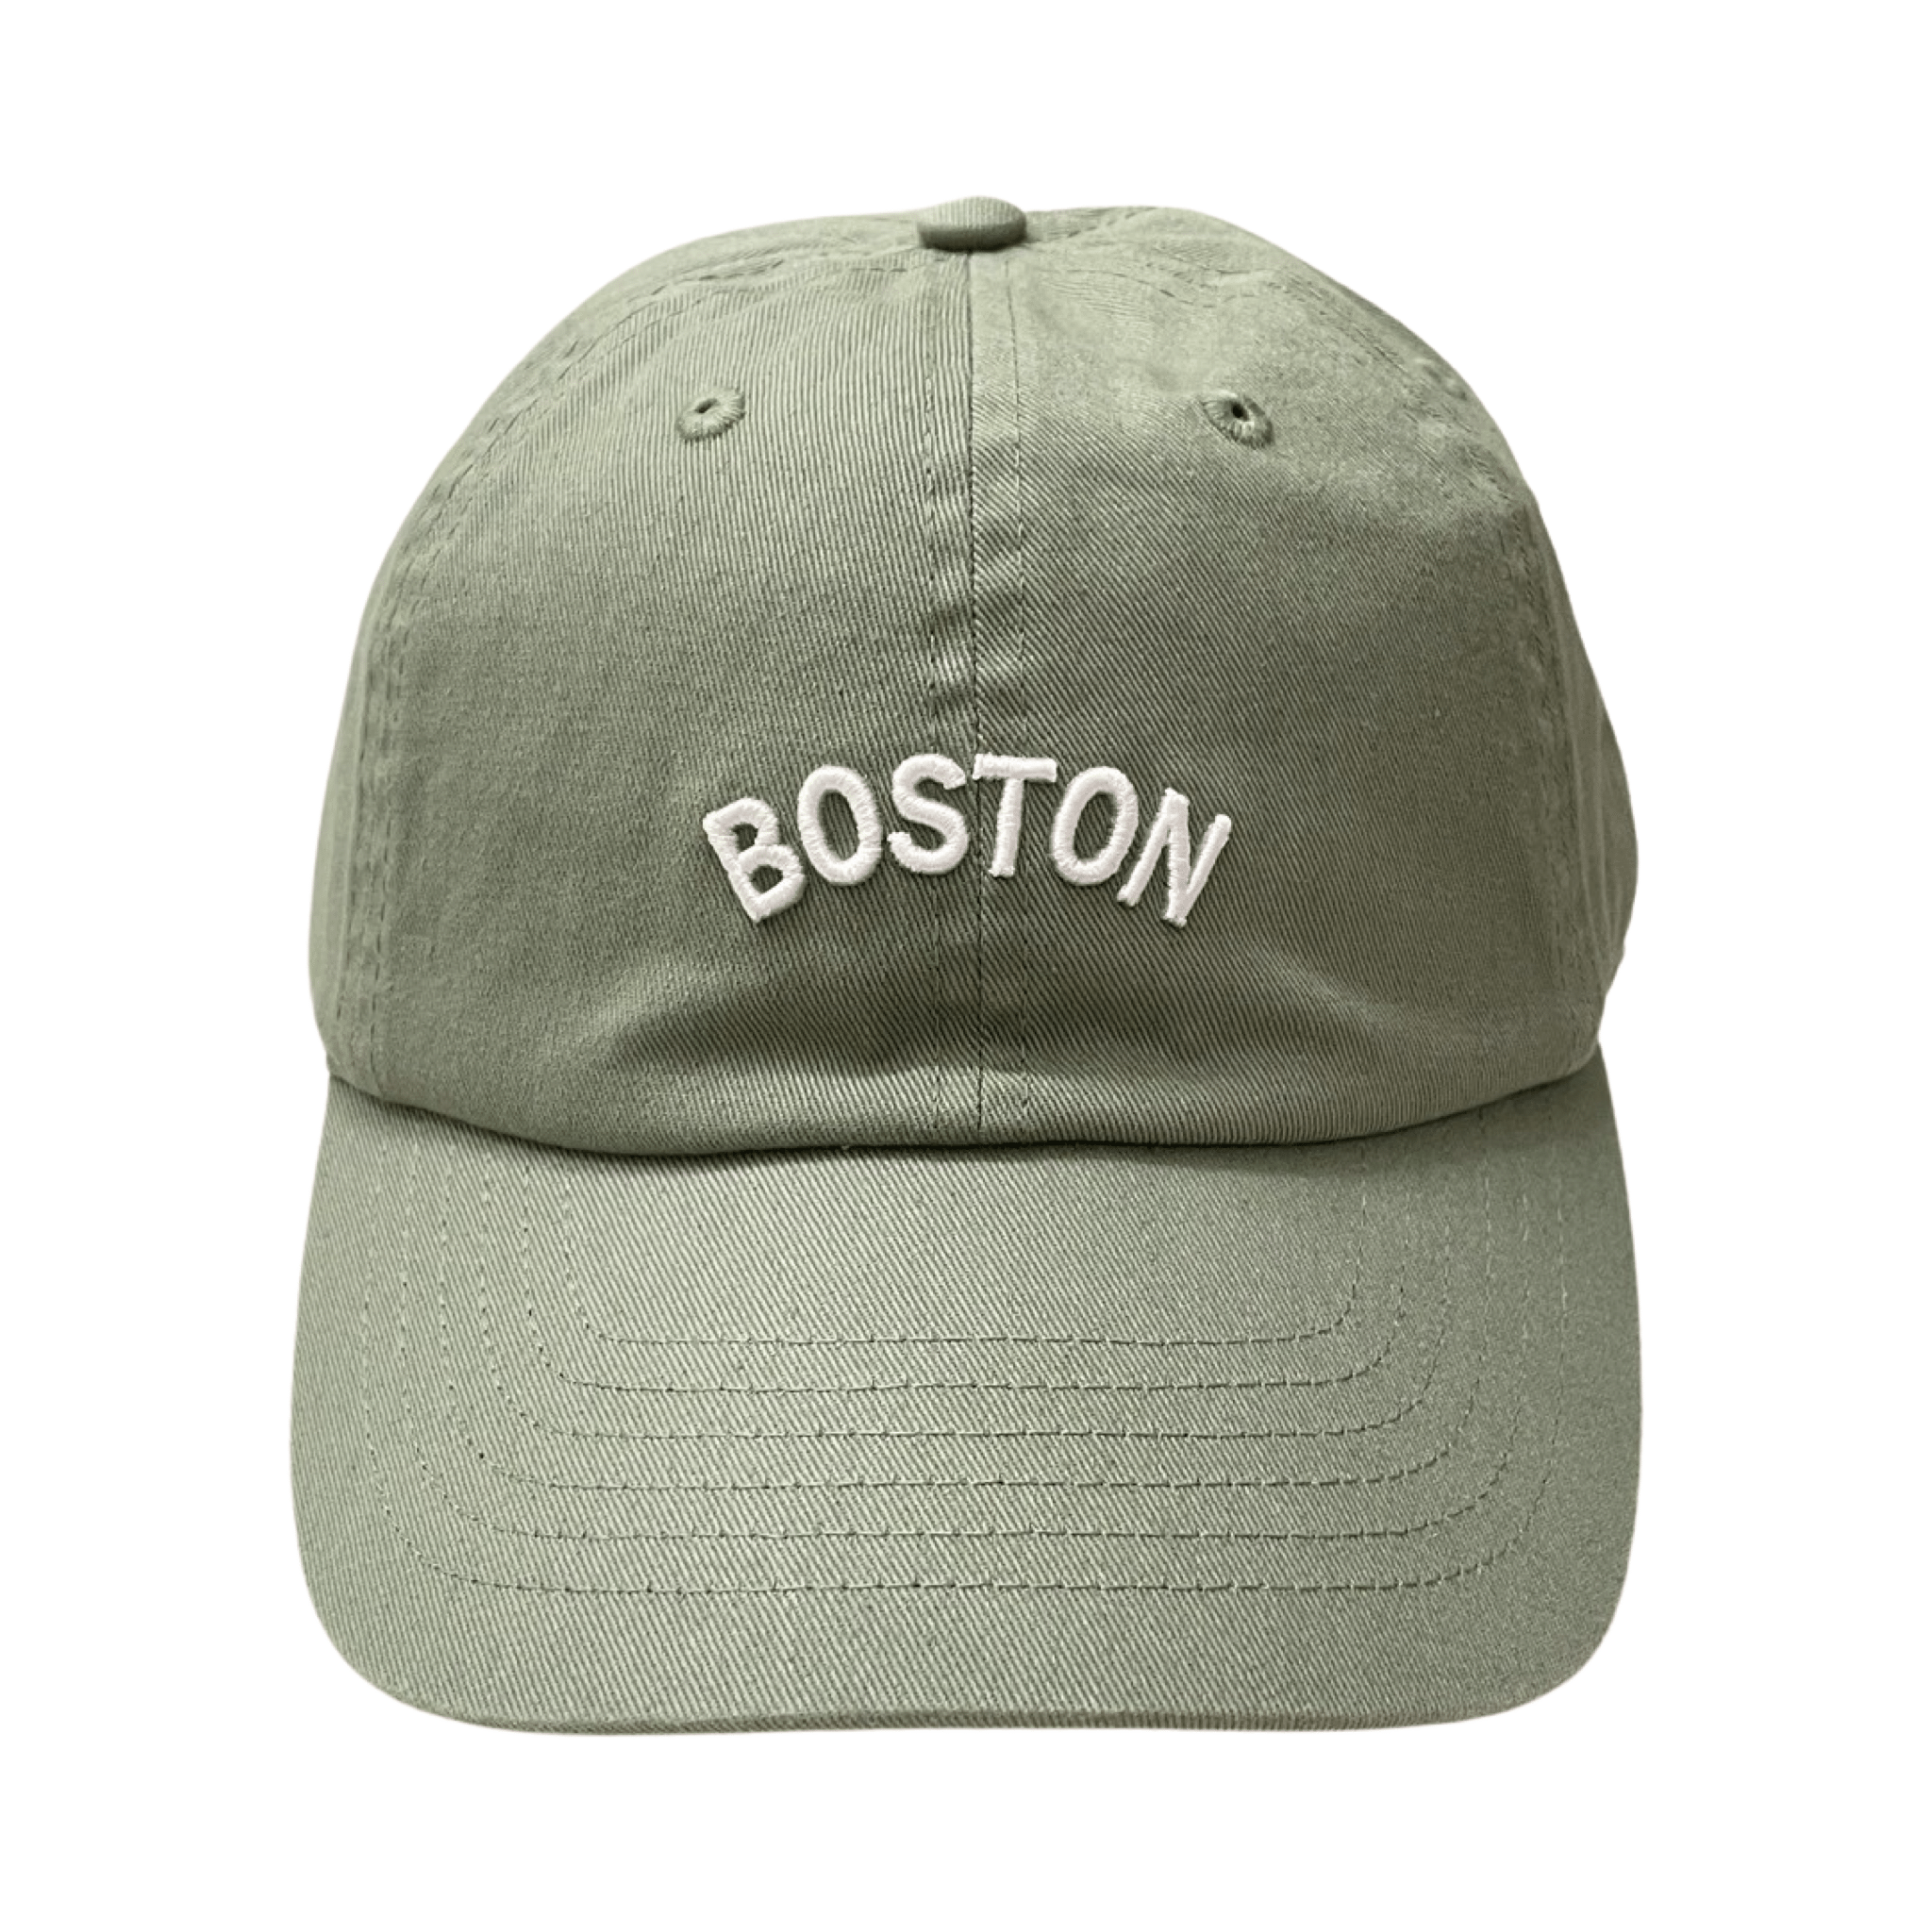 Boston Classic Embroidered Adjustable Hat, front